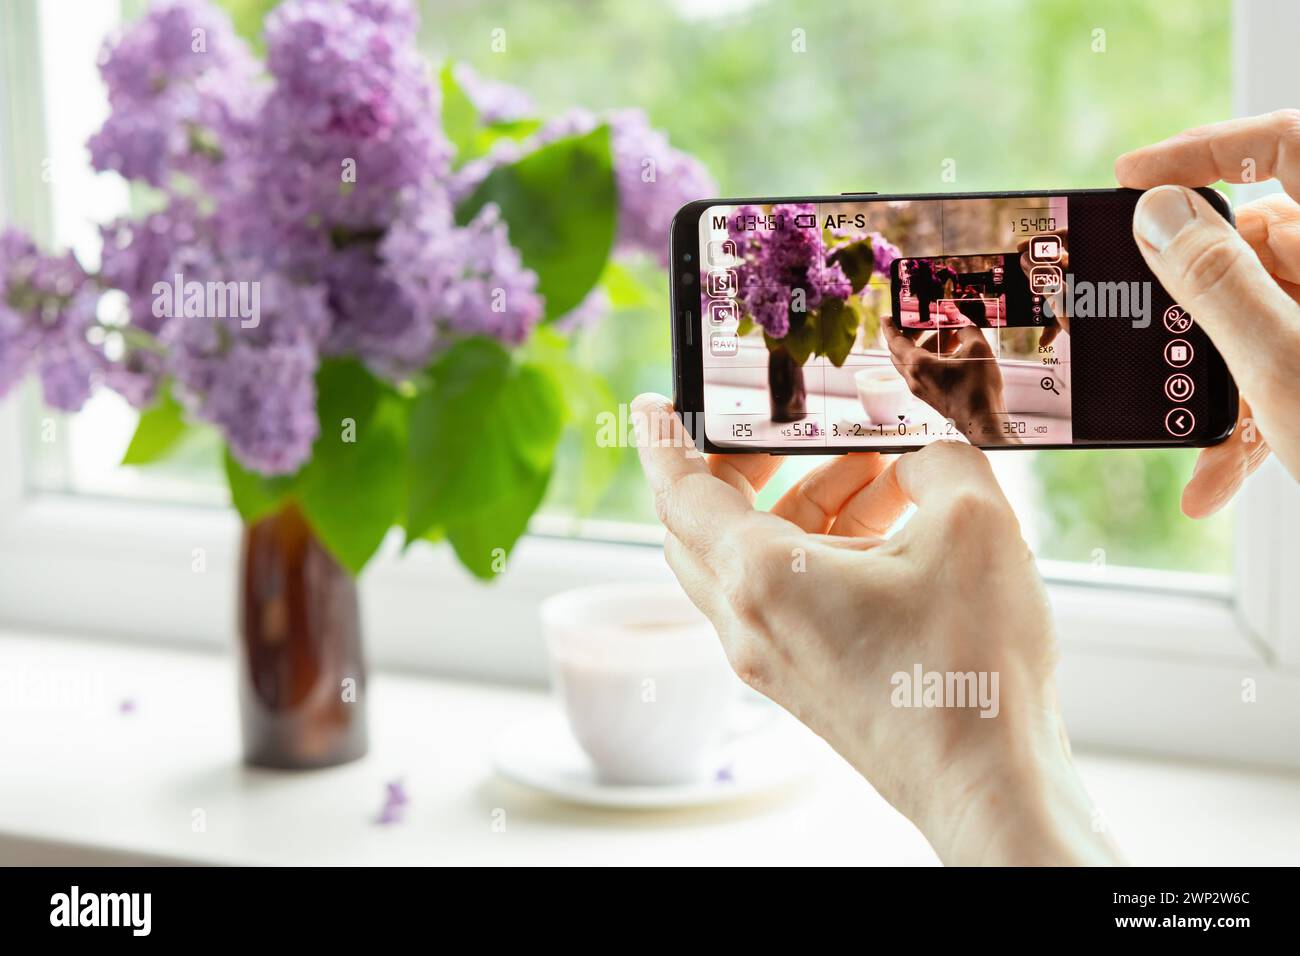 woman photographs a lilac flower arrangement at home with a camera remotely via an application on a smartphone. Remote camera control technology Stock Photo